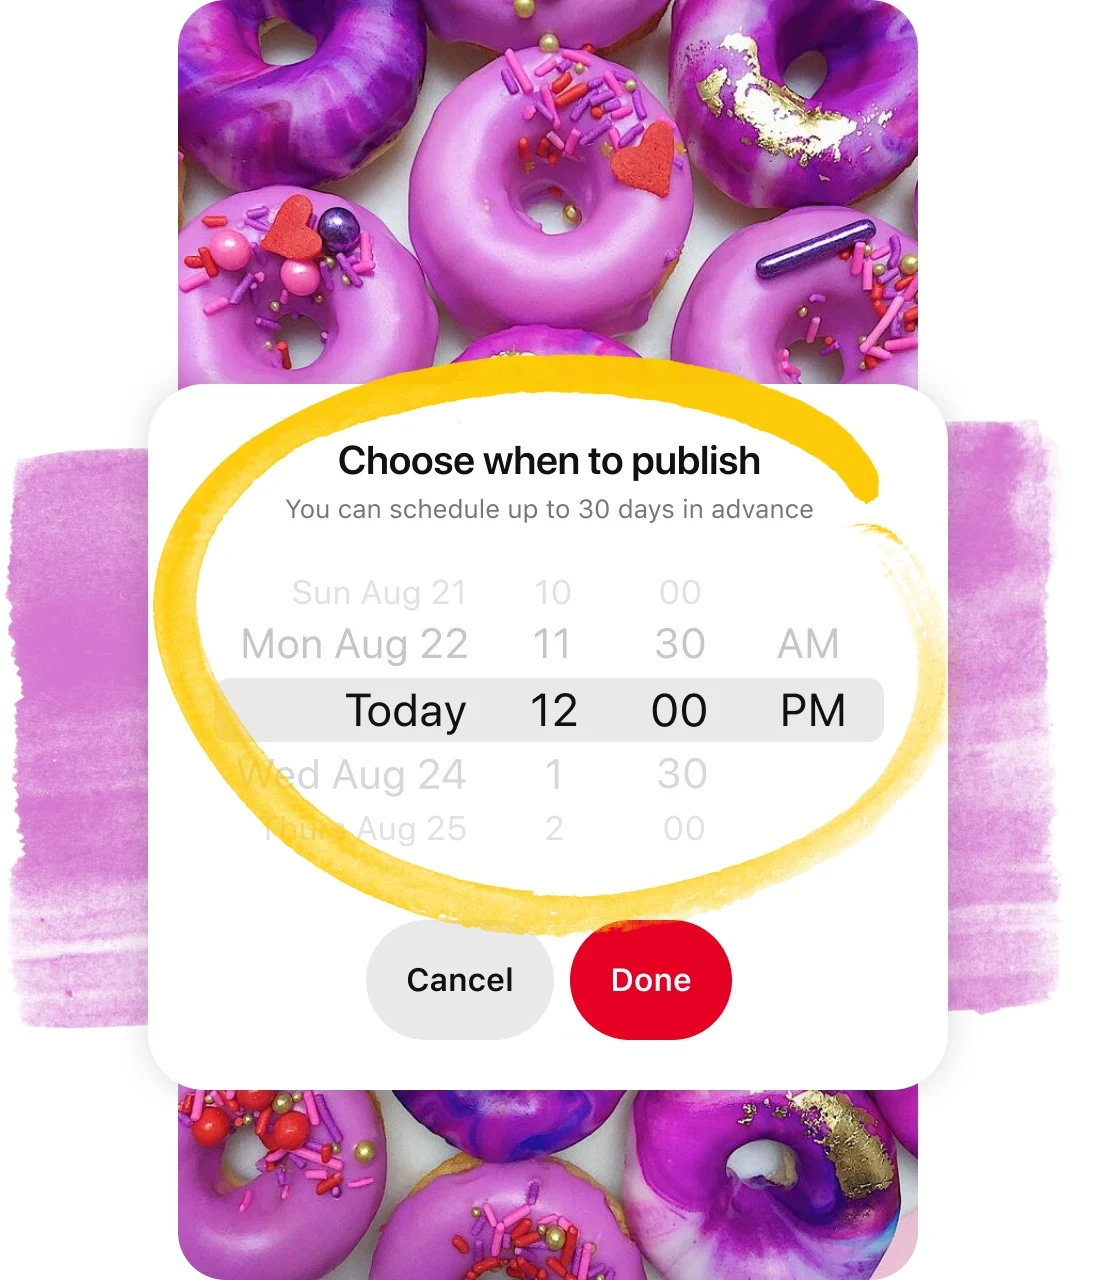 Snapshot of pin board scheduler circled in yellow overlaid on pin of purple donuts